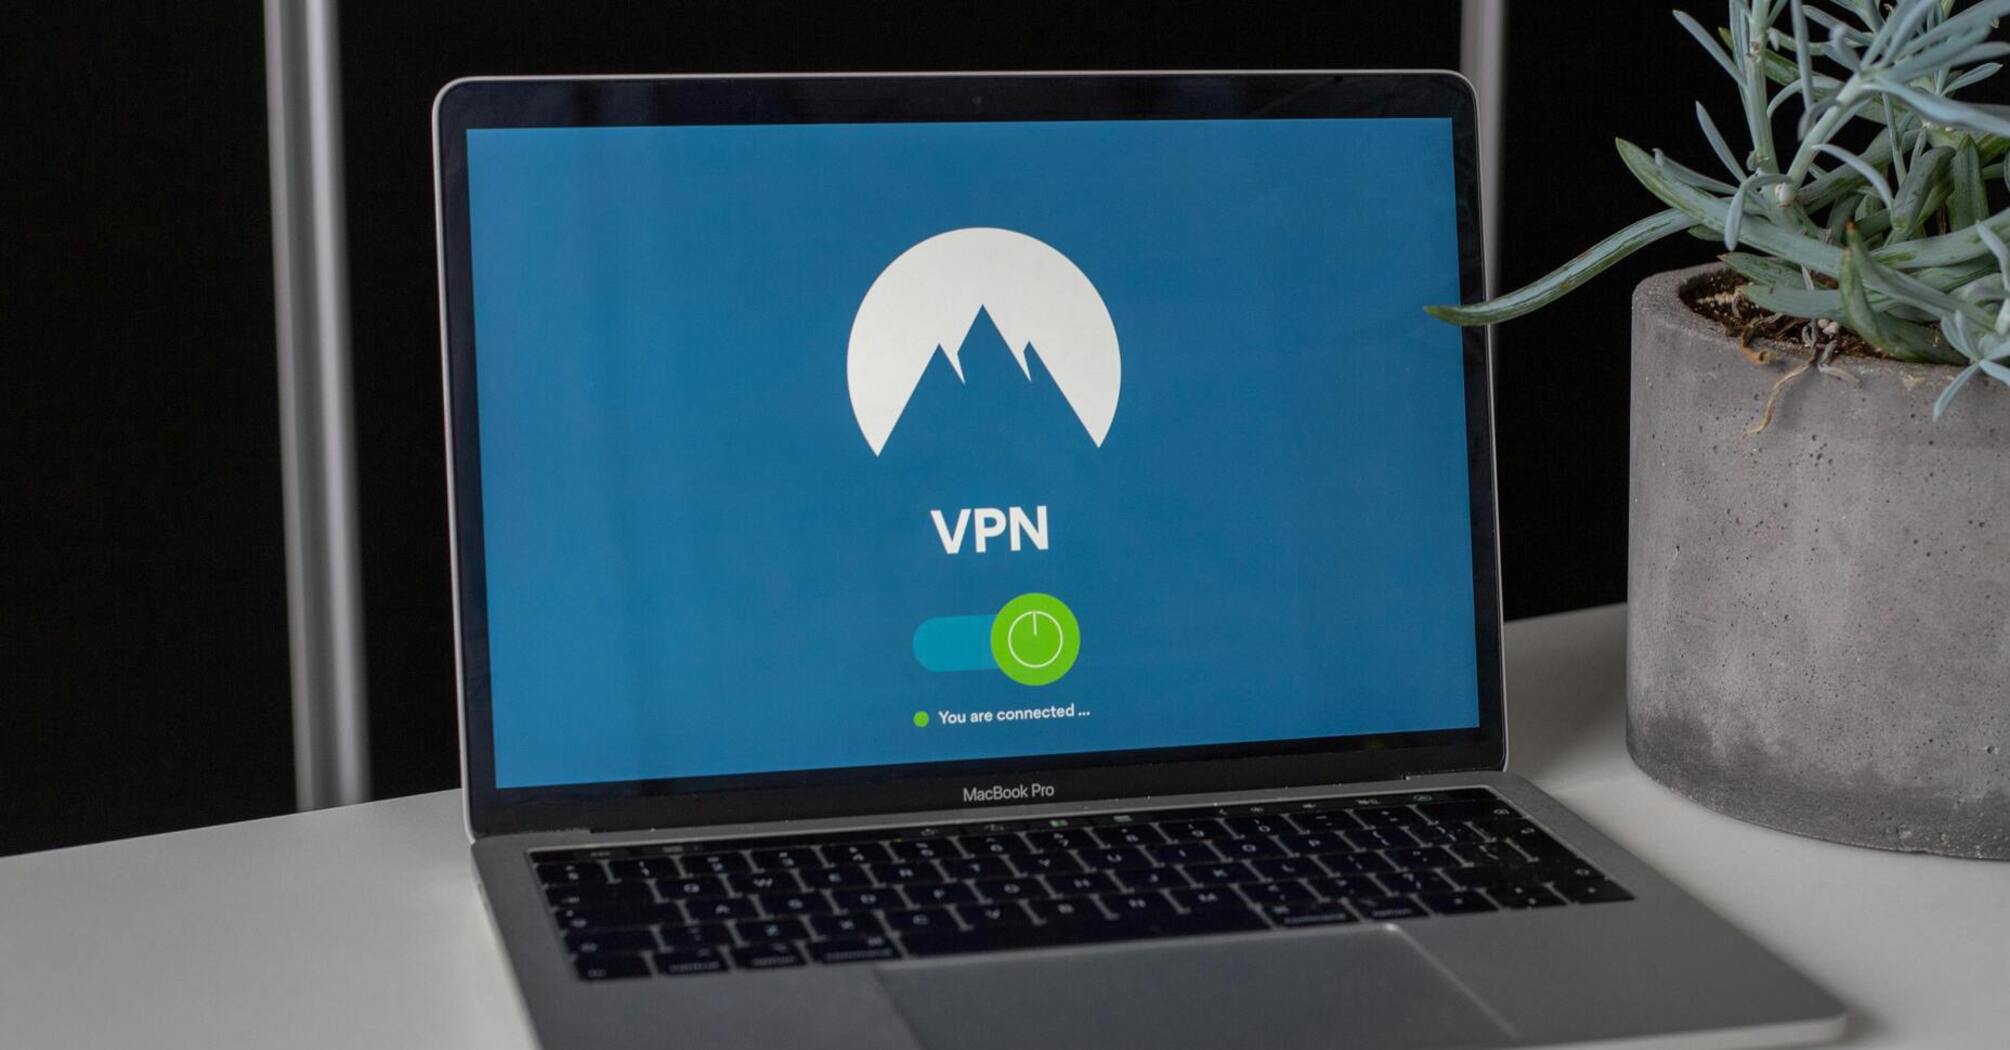 Using a VPN: Advantages and disadvantages you should know